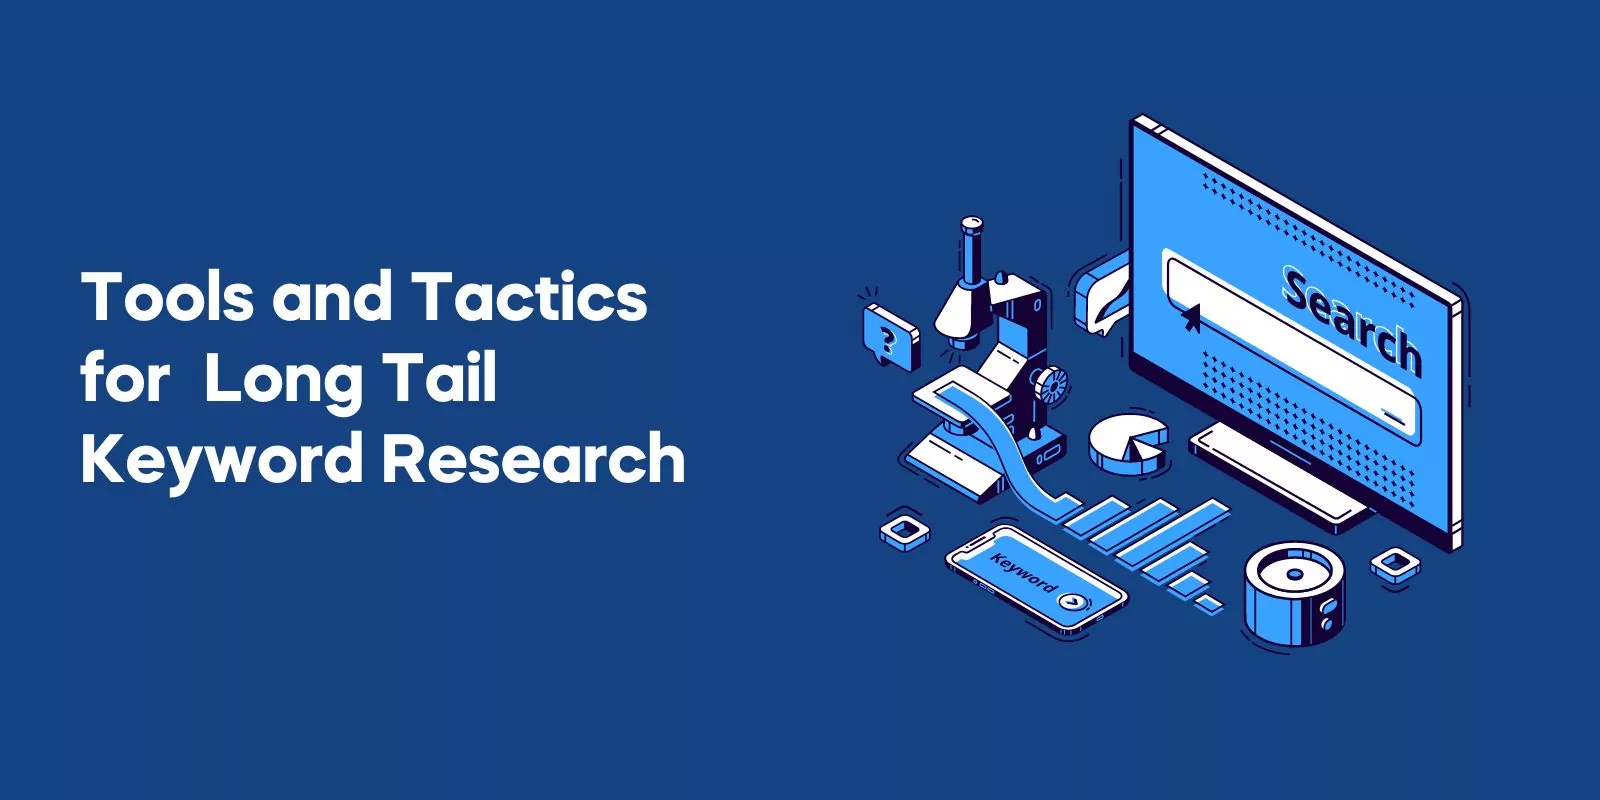 Tools and Tactics for Long Tail Keyword Research